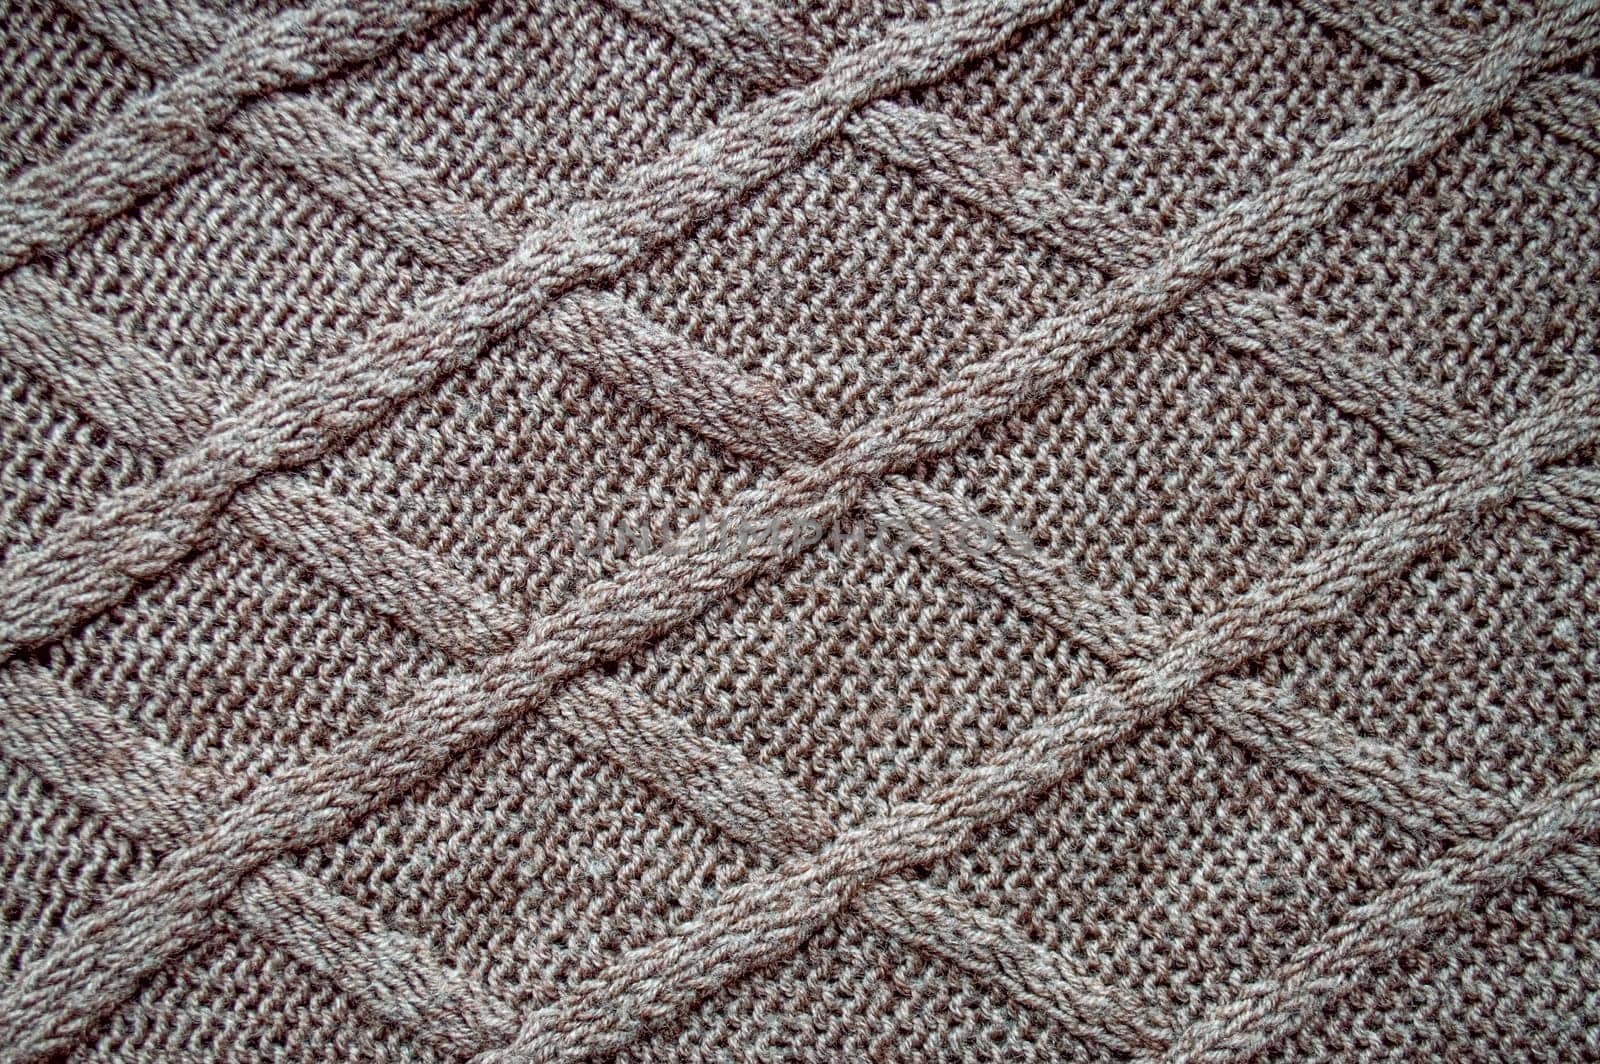 Knitting Texture. Vintage Woven Textile. Knitwear Xmas Background. Soft Knitted Texture. Closeup Thread. Nordic Winter Plaid. Woolen Scarf Embroidery. Cotton Knitted Texture.